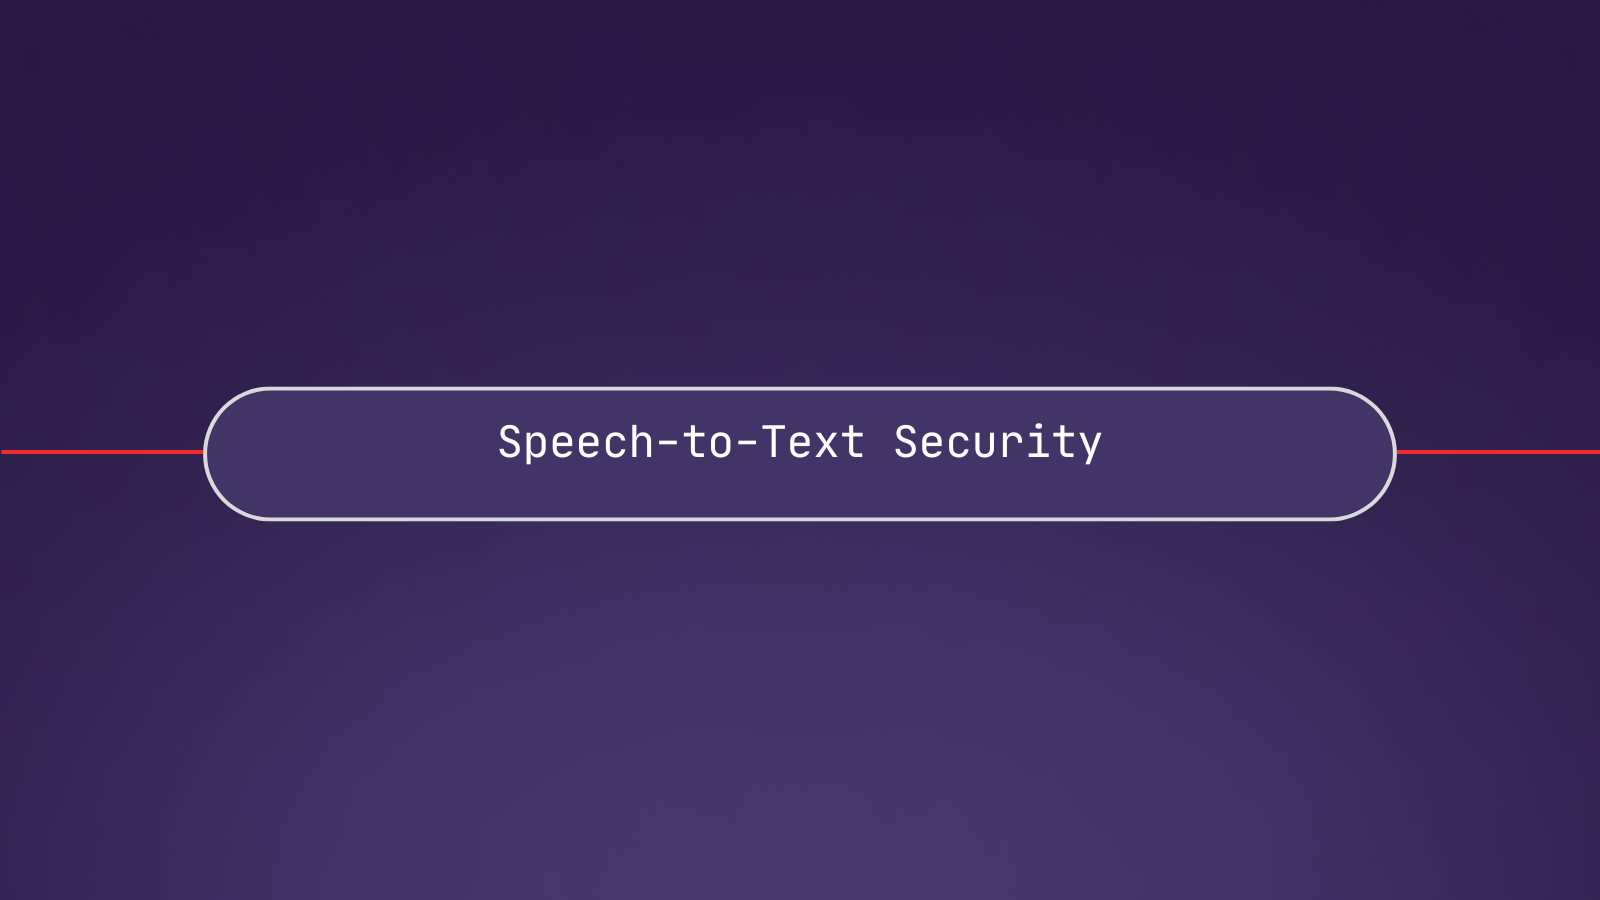 Speech-to-Text security: Top foundational security questions to consider for your next project using speech